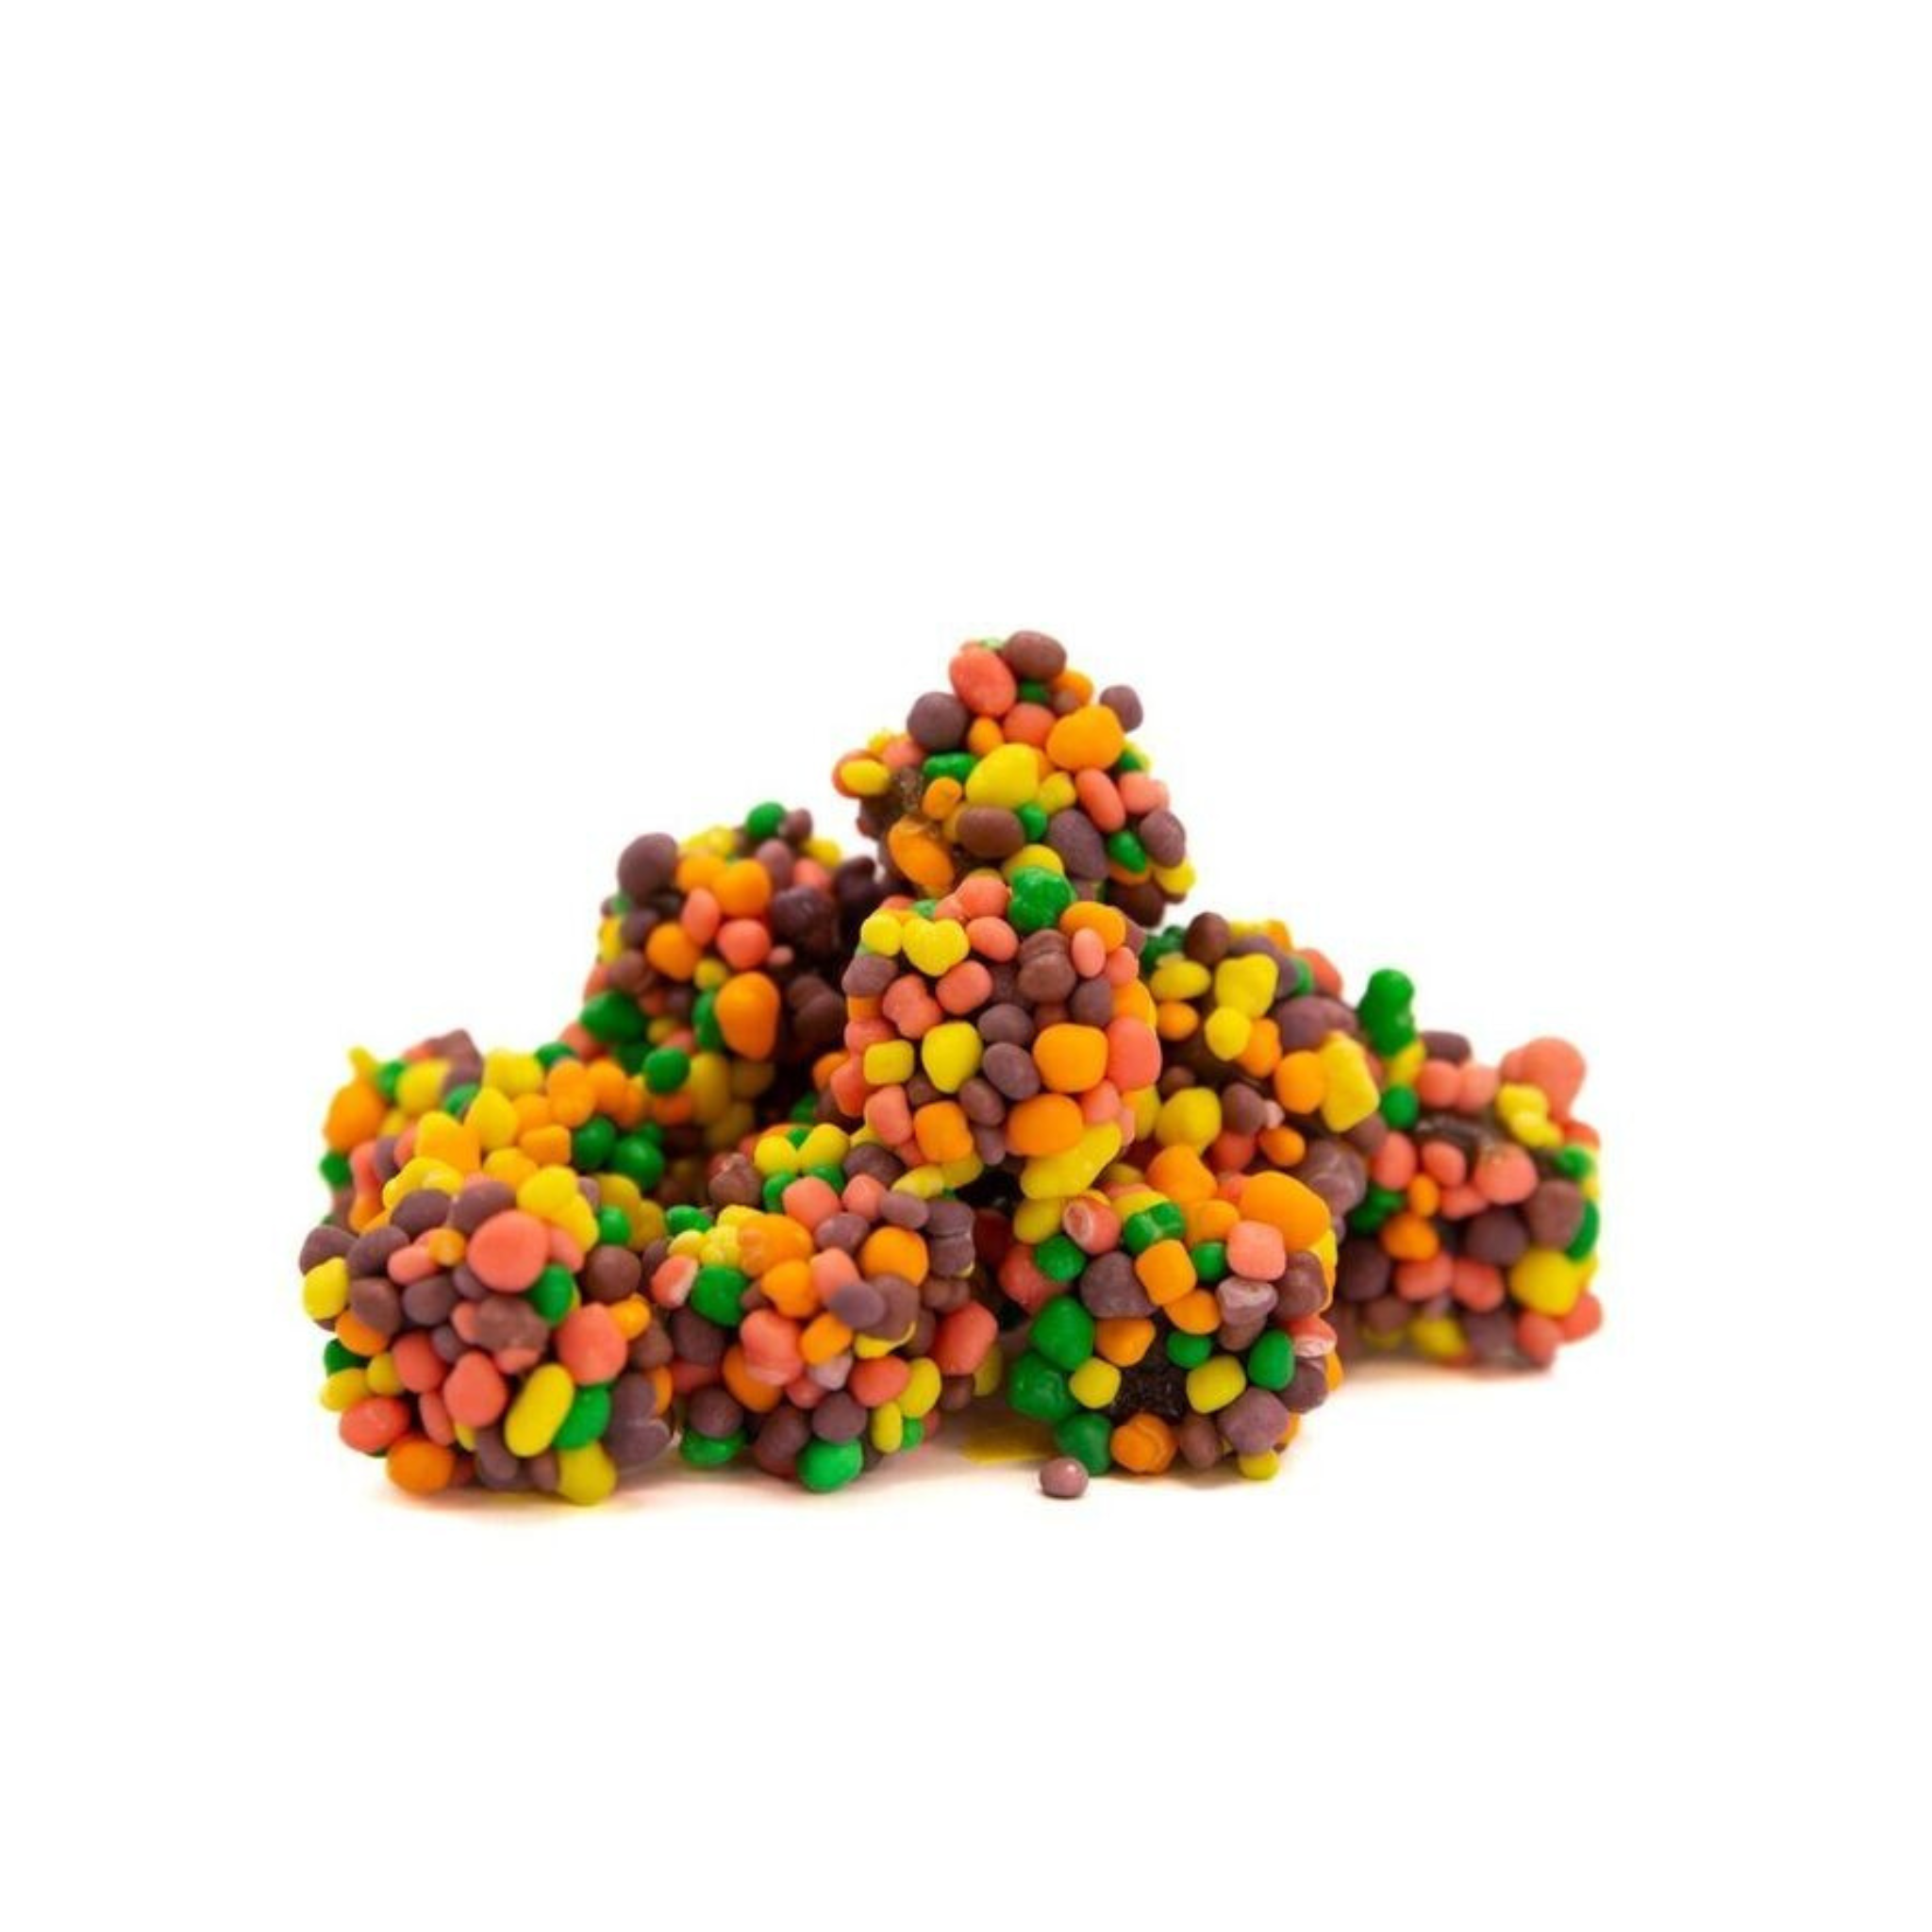 Nerds Rope Bites Delta 8 Candy 600mg 60mg Per Piece 10 Flavors